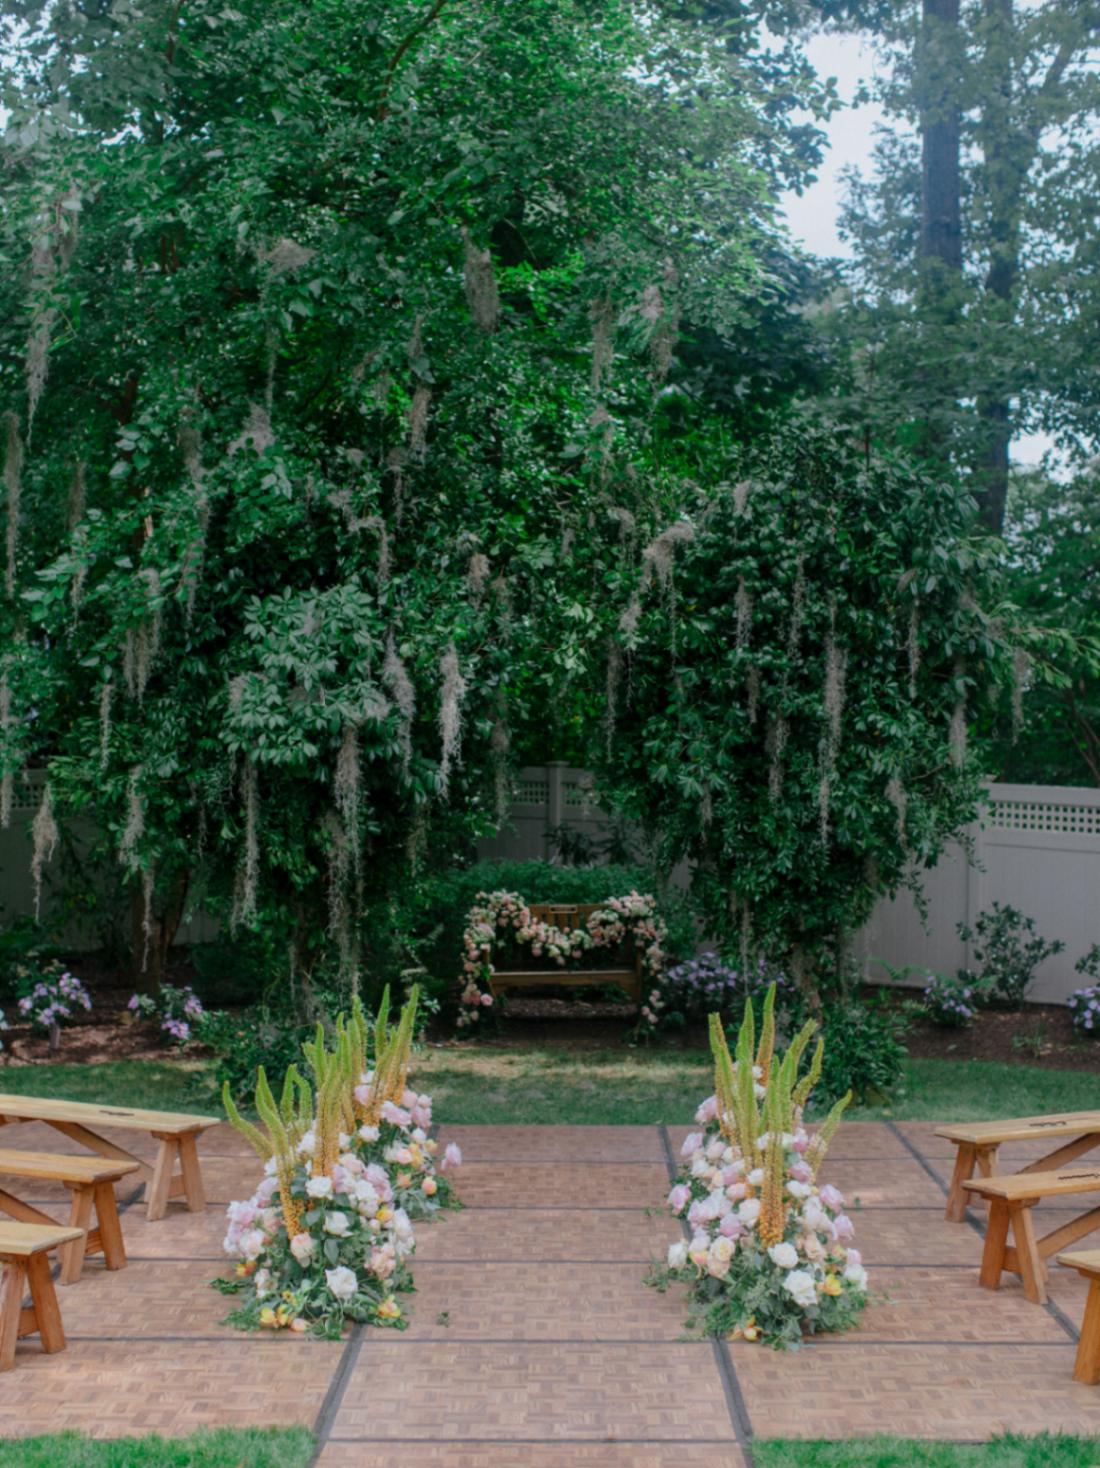 Outdoor wedding ceremony set up with wooden benches, a prayer bench, two mossy oaks | Photo by Chris J. Evans